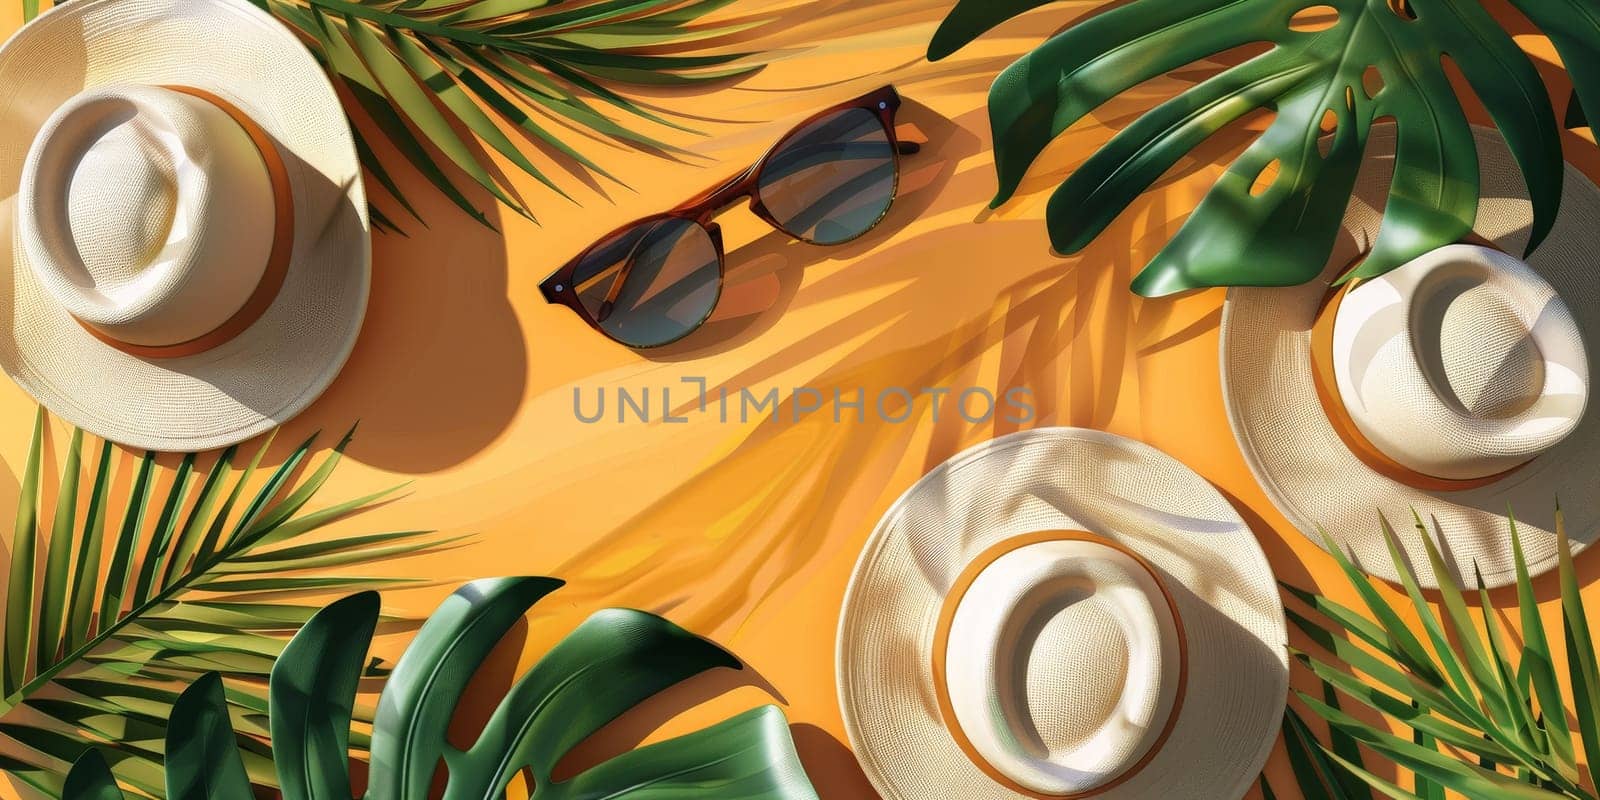 A tropical scene with hats, sunglasses, and palm trees